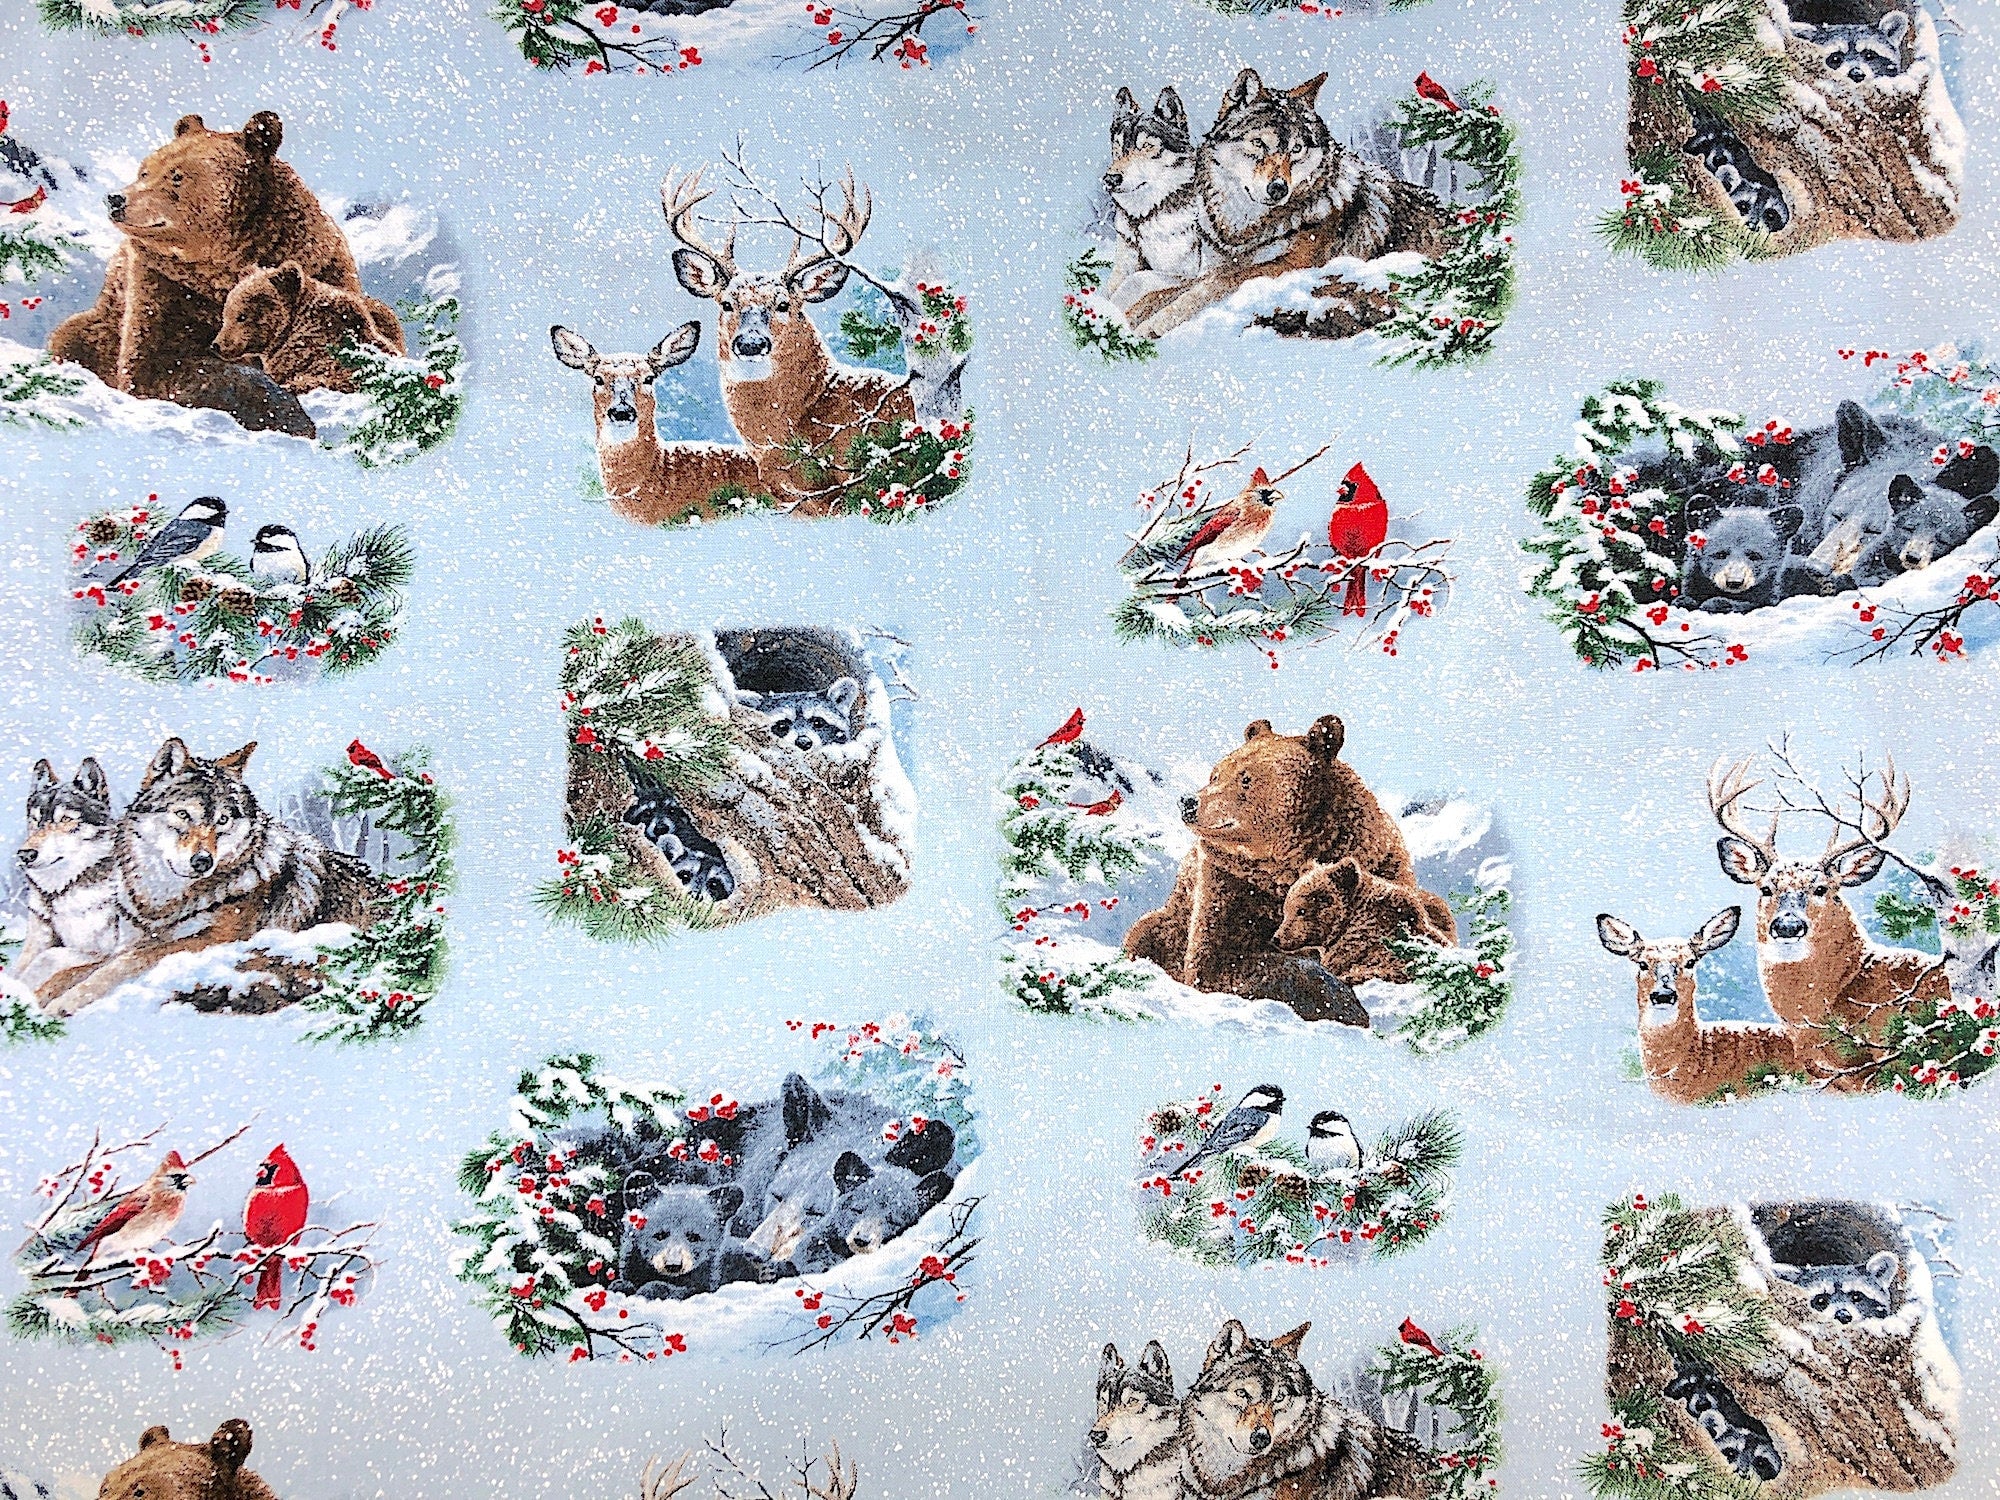 This fabric is called Winter Companions and is covered in bears, deer, raccoon, and birds. There is snow falling all over the light blue background.